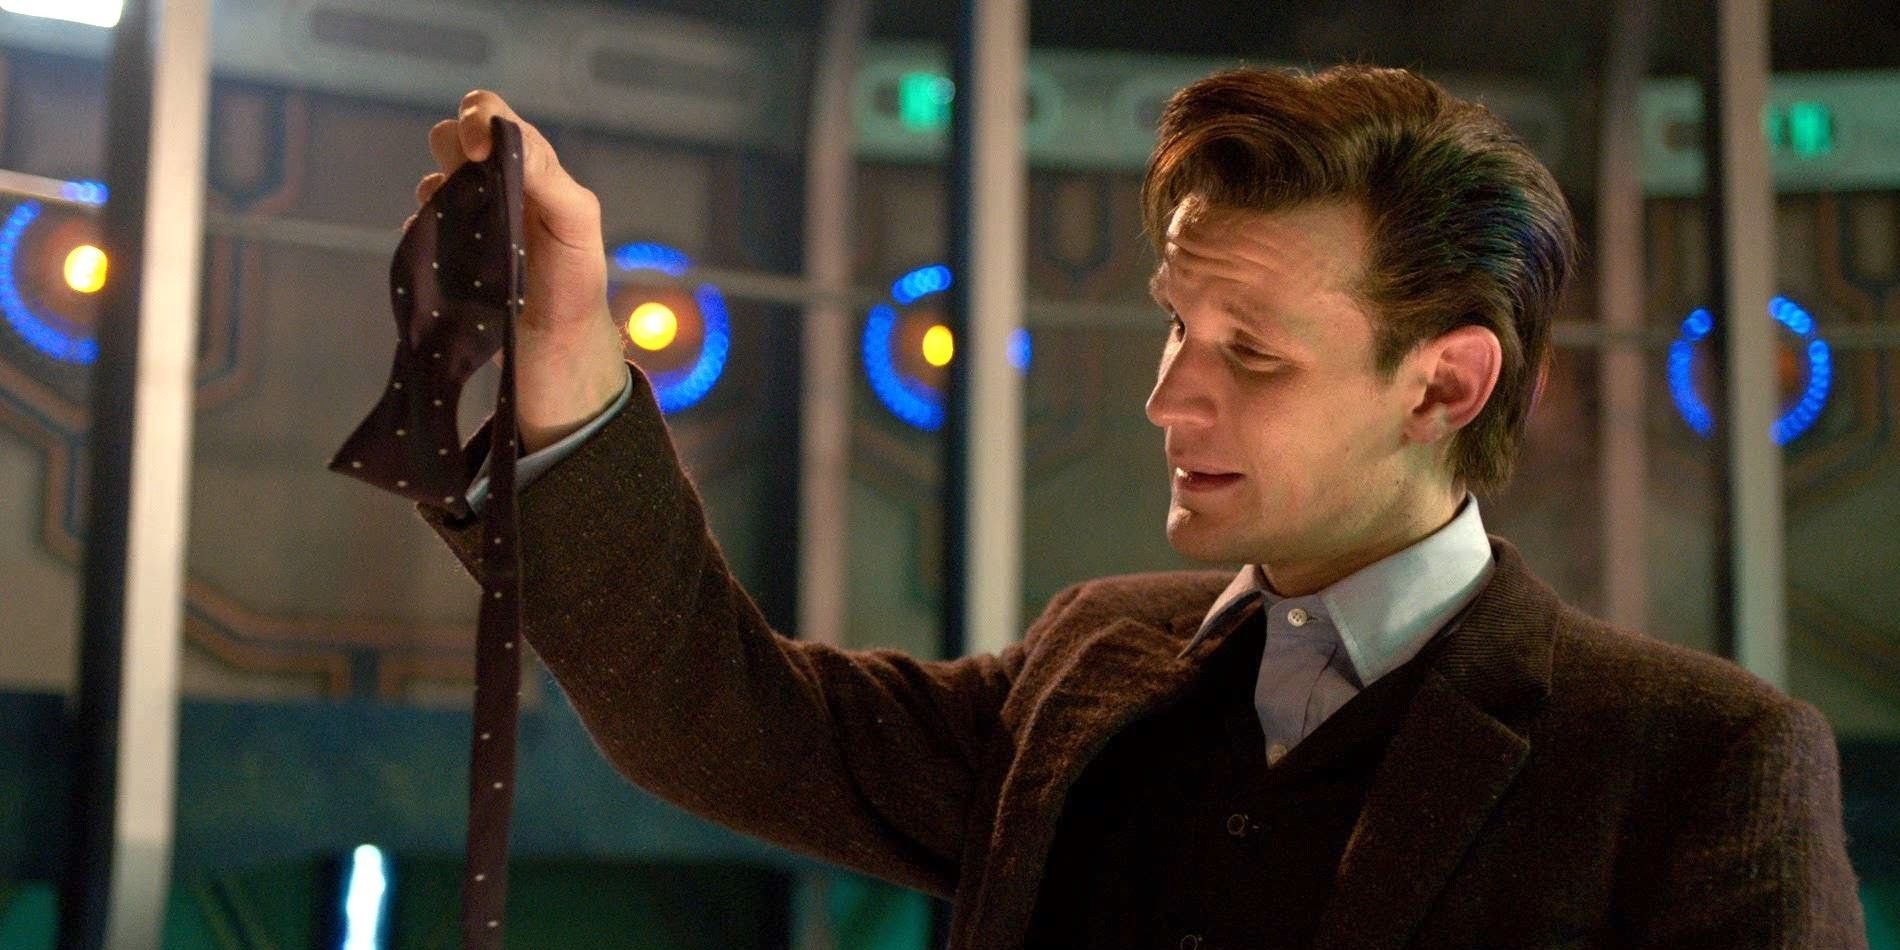 Doctor Who 10 Unpopular Opinions About The 11th Doctor (According To Reddit)